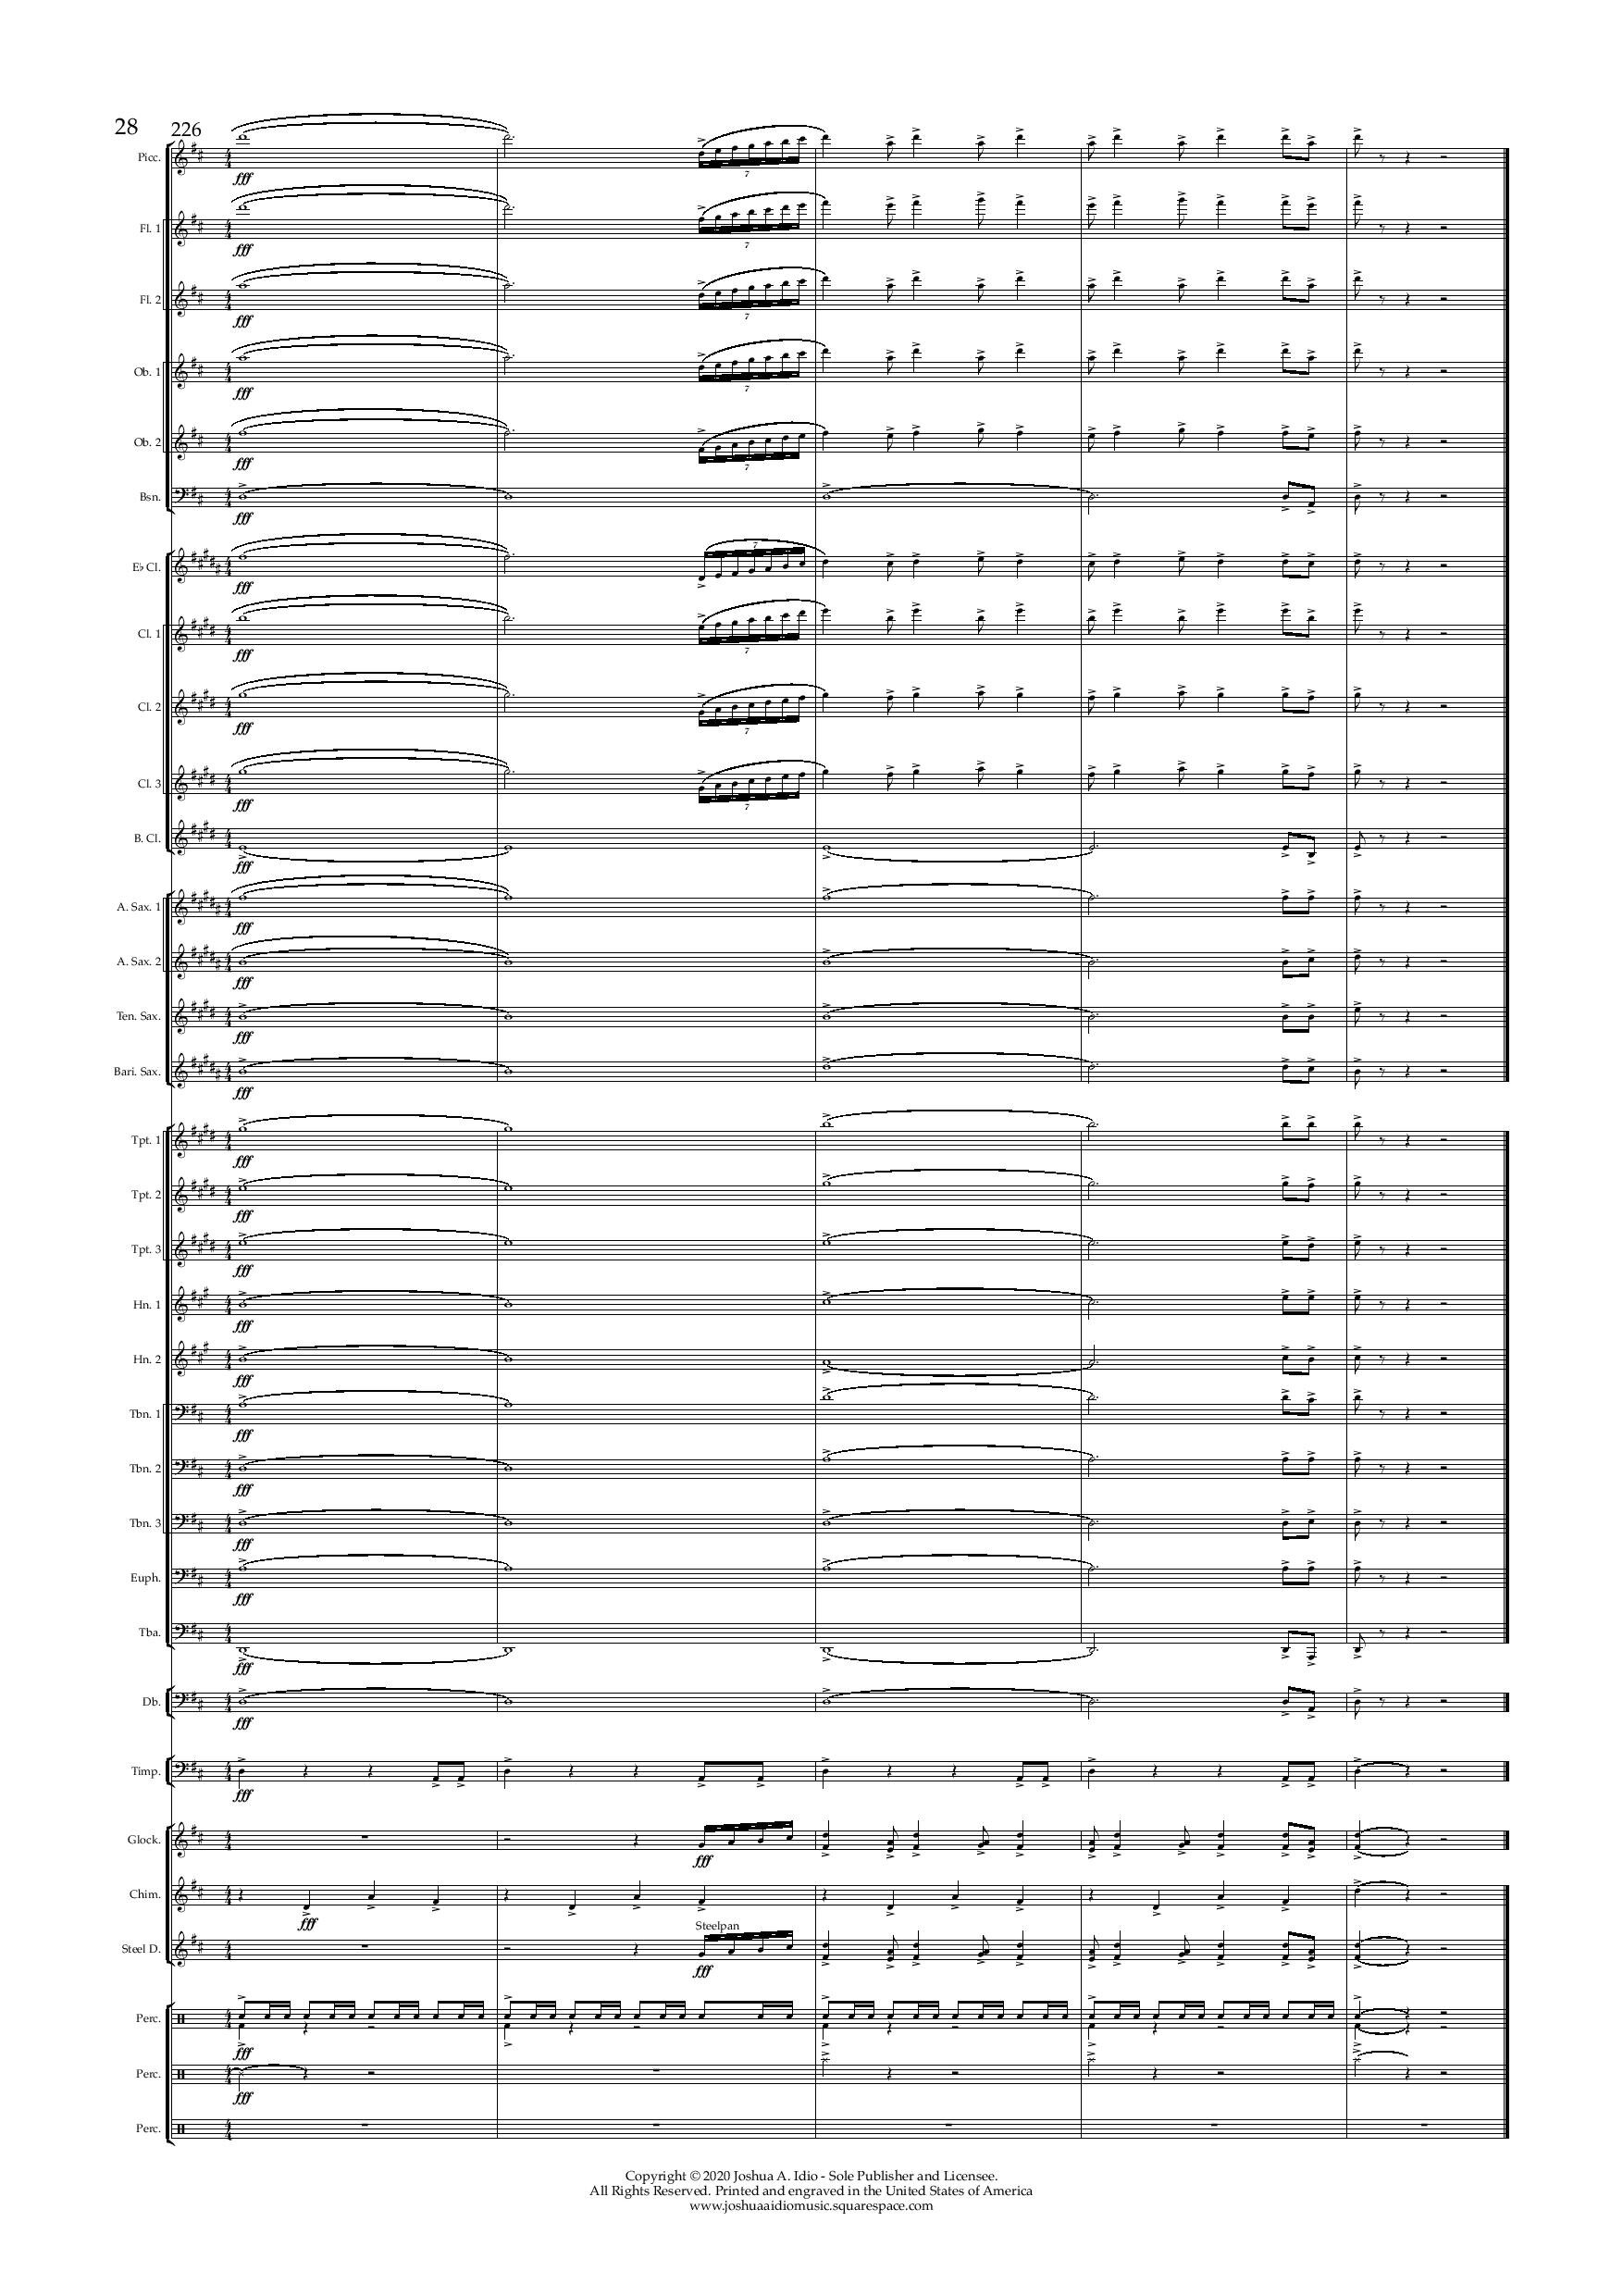 The Cruise Line Dream - Conductor s Score-page-028.jpg